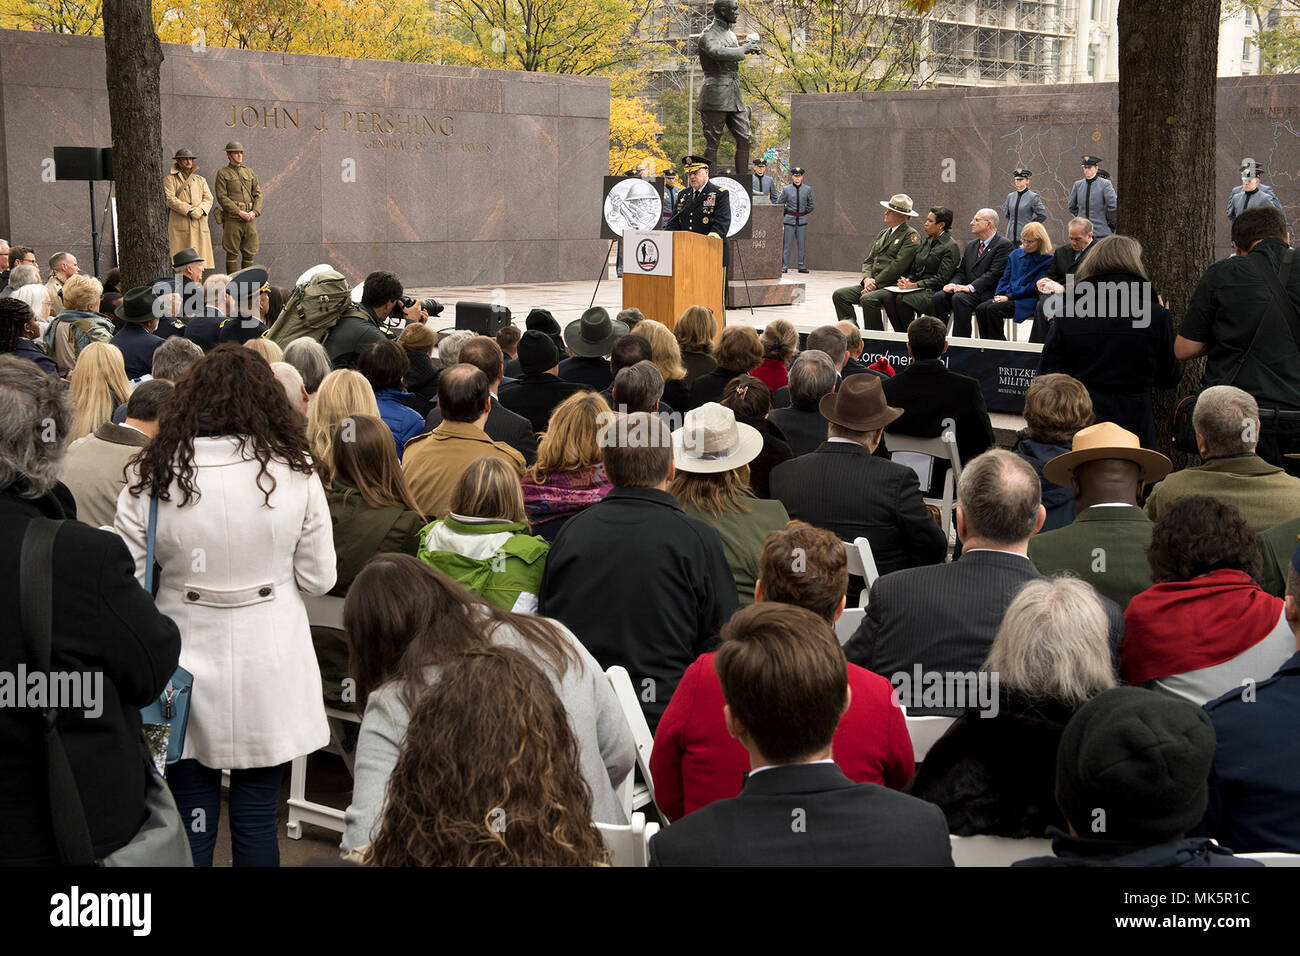 General Mark A. Milley, U.S. Army Chief of Staff, speaks at the ceremonial groundbreaking for the National World War I Memorial at Pershing Park in Washington, D.C. Nov. 9, 2017. Construction of the memorial is expected to be completed in a year. (DoD photo by EJ Hersom) Stock Photo